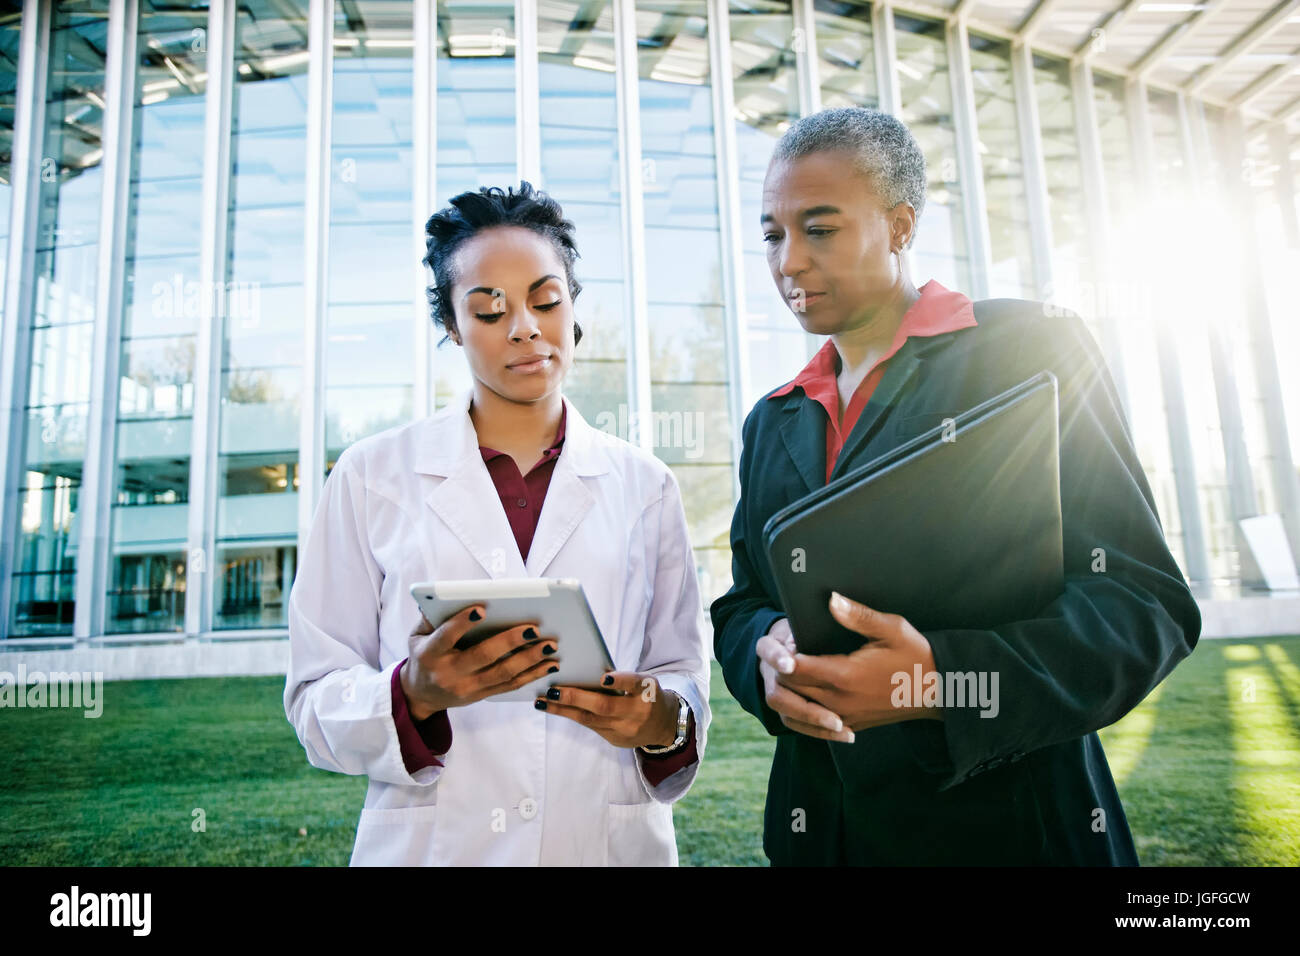 Doctor and administrator outdoors at hospital using digital tablet Stock Photo